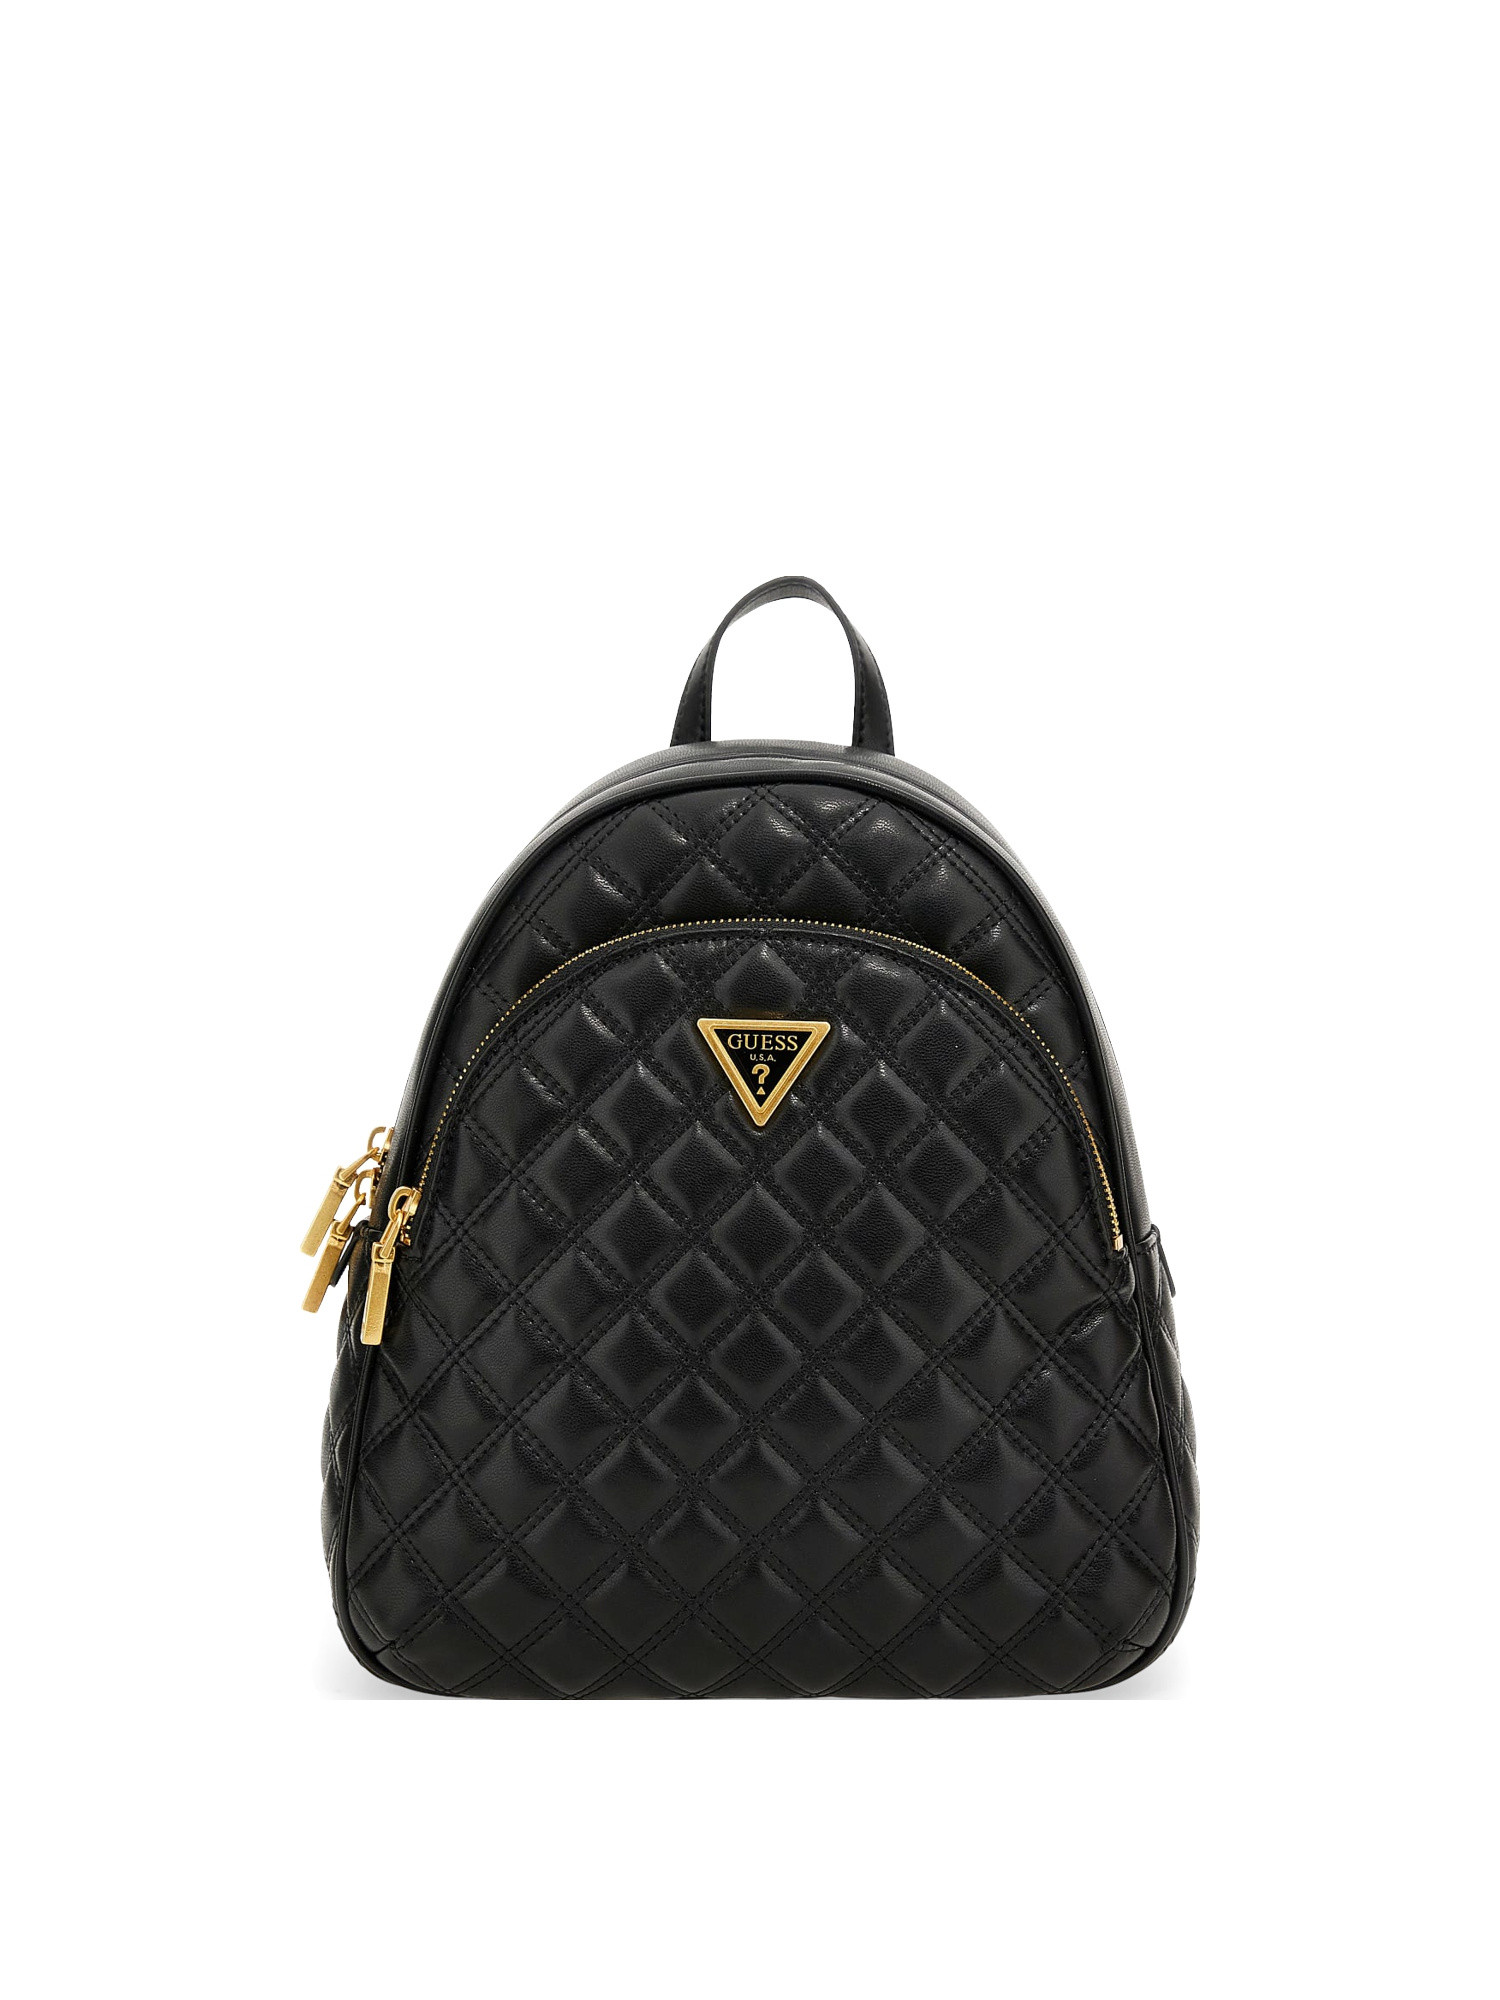 Guess - Giully quilted backpack, Black, large image number 0